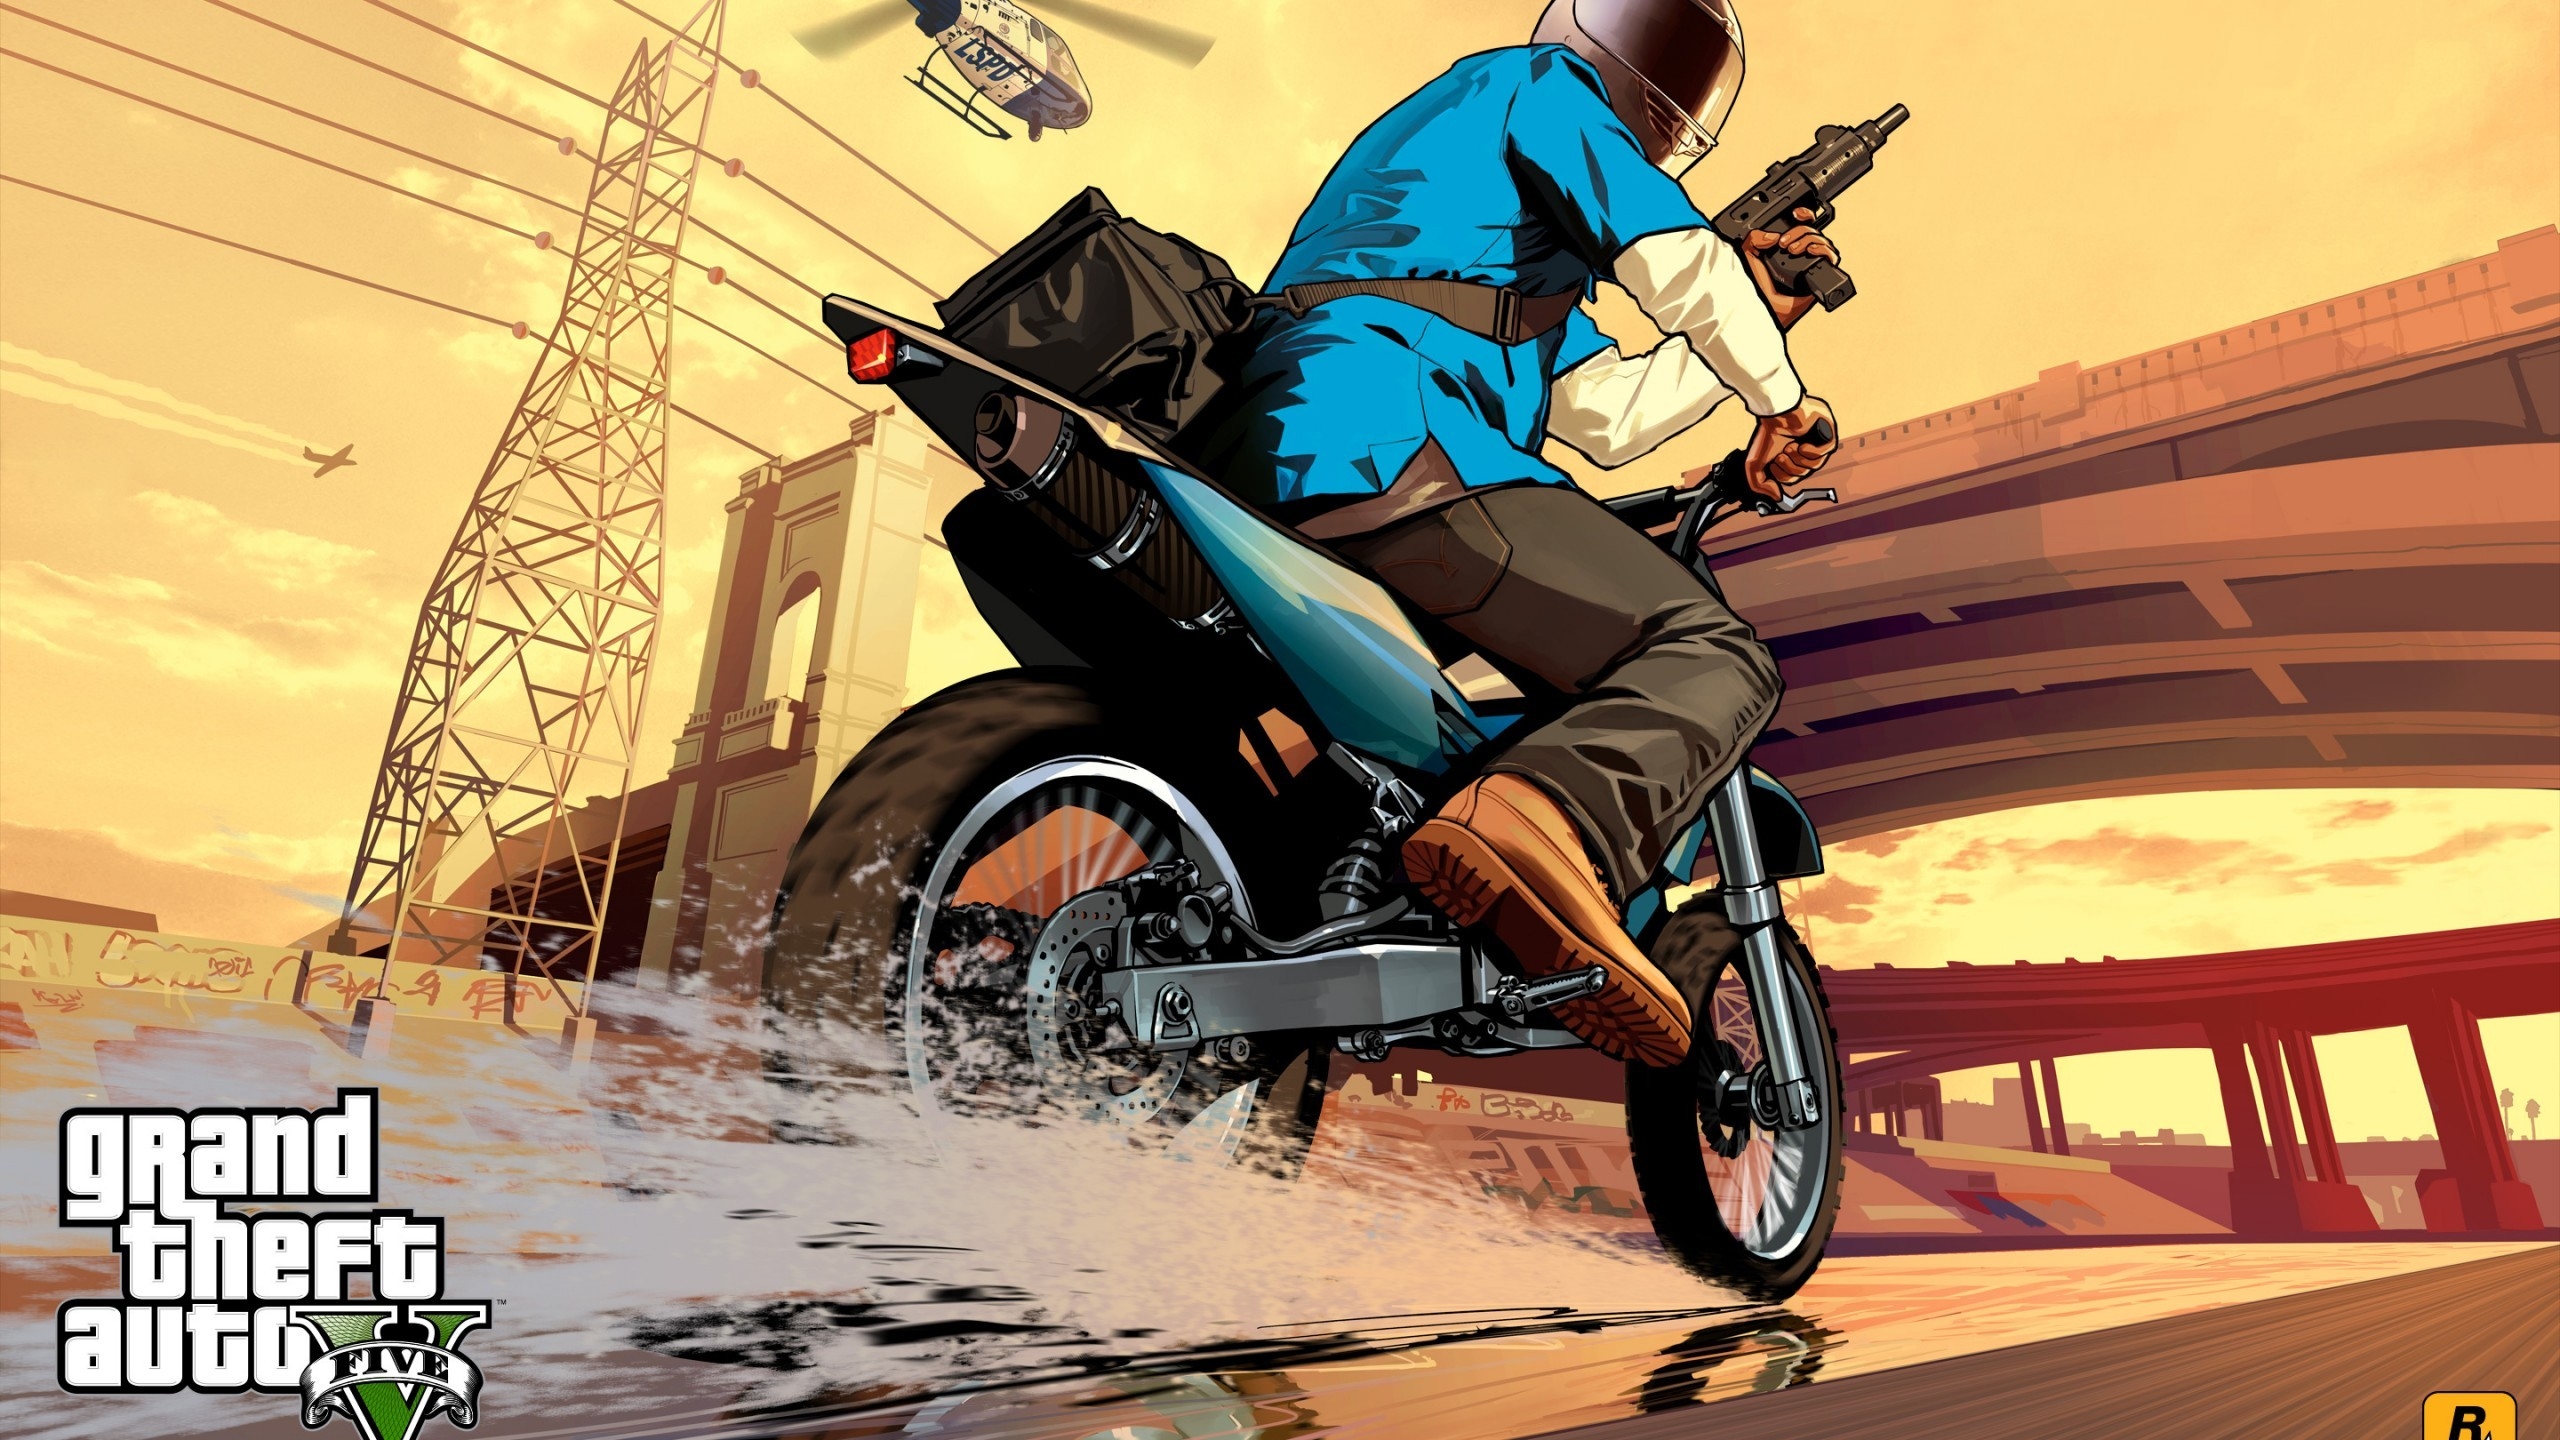 Grand Theft Auto V Poster for 2560x1440 HDTV resolution